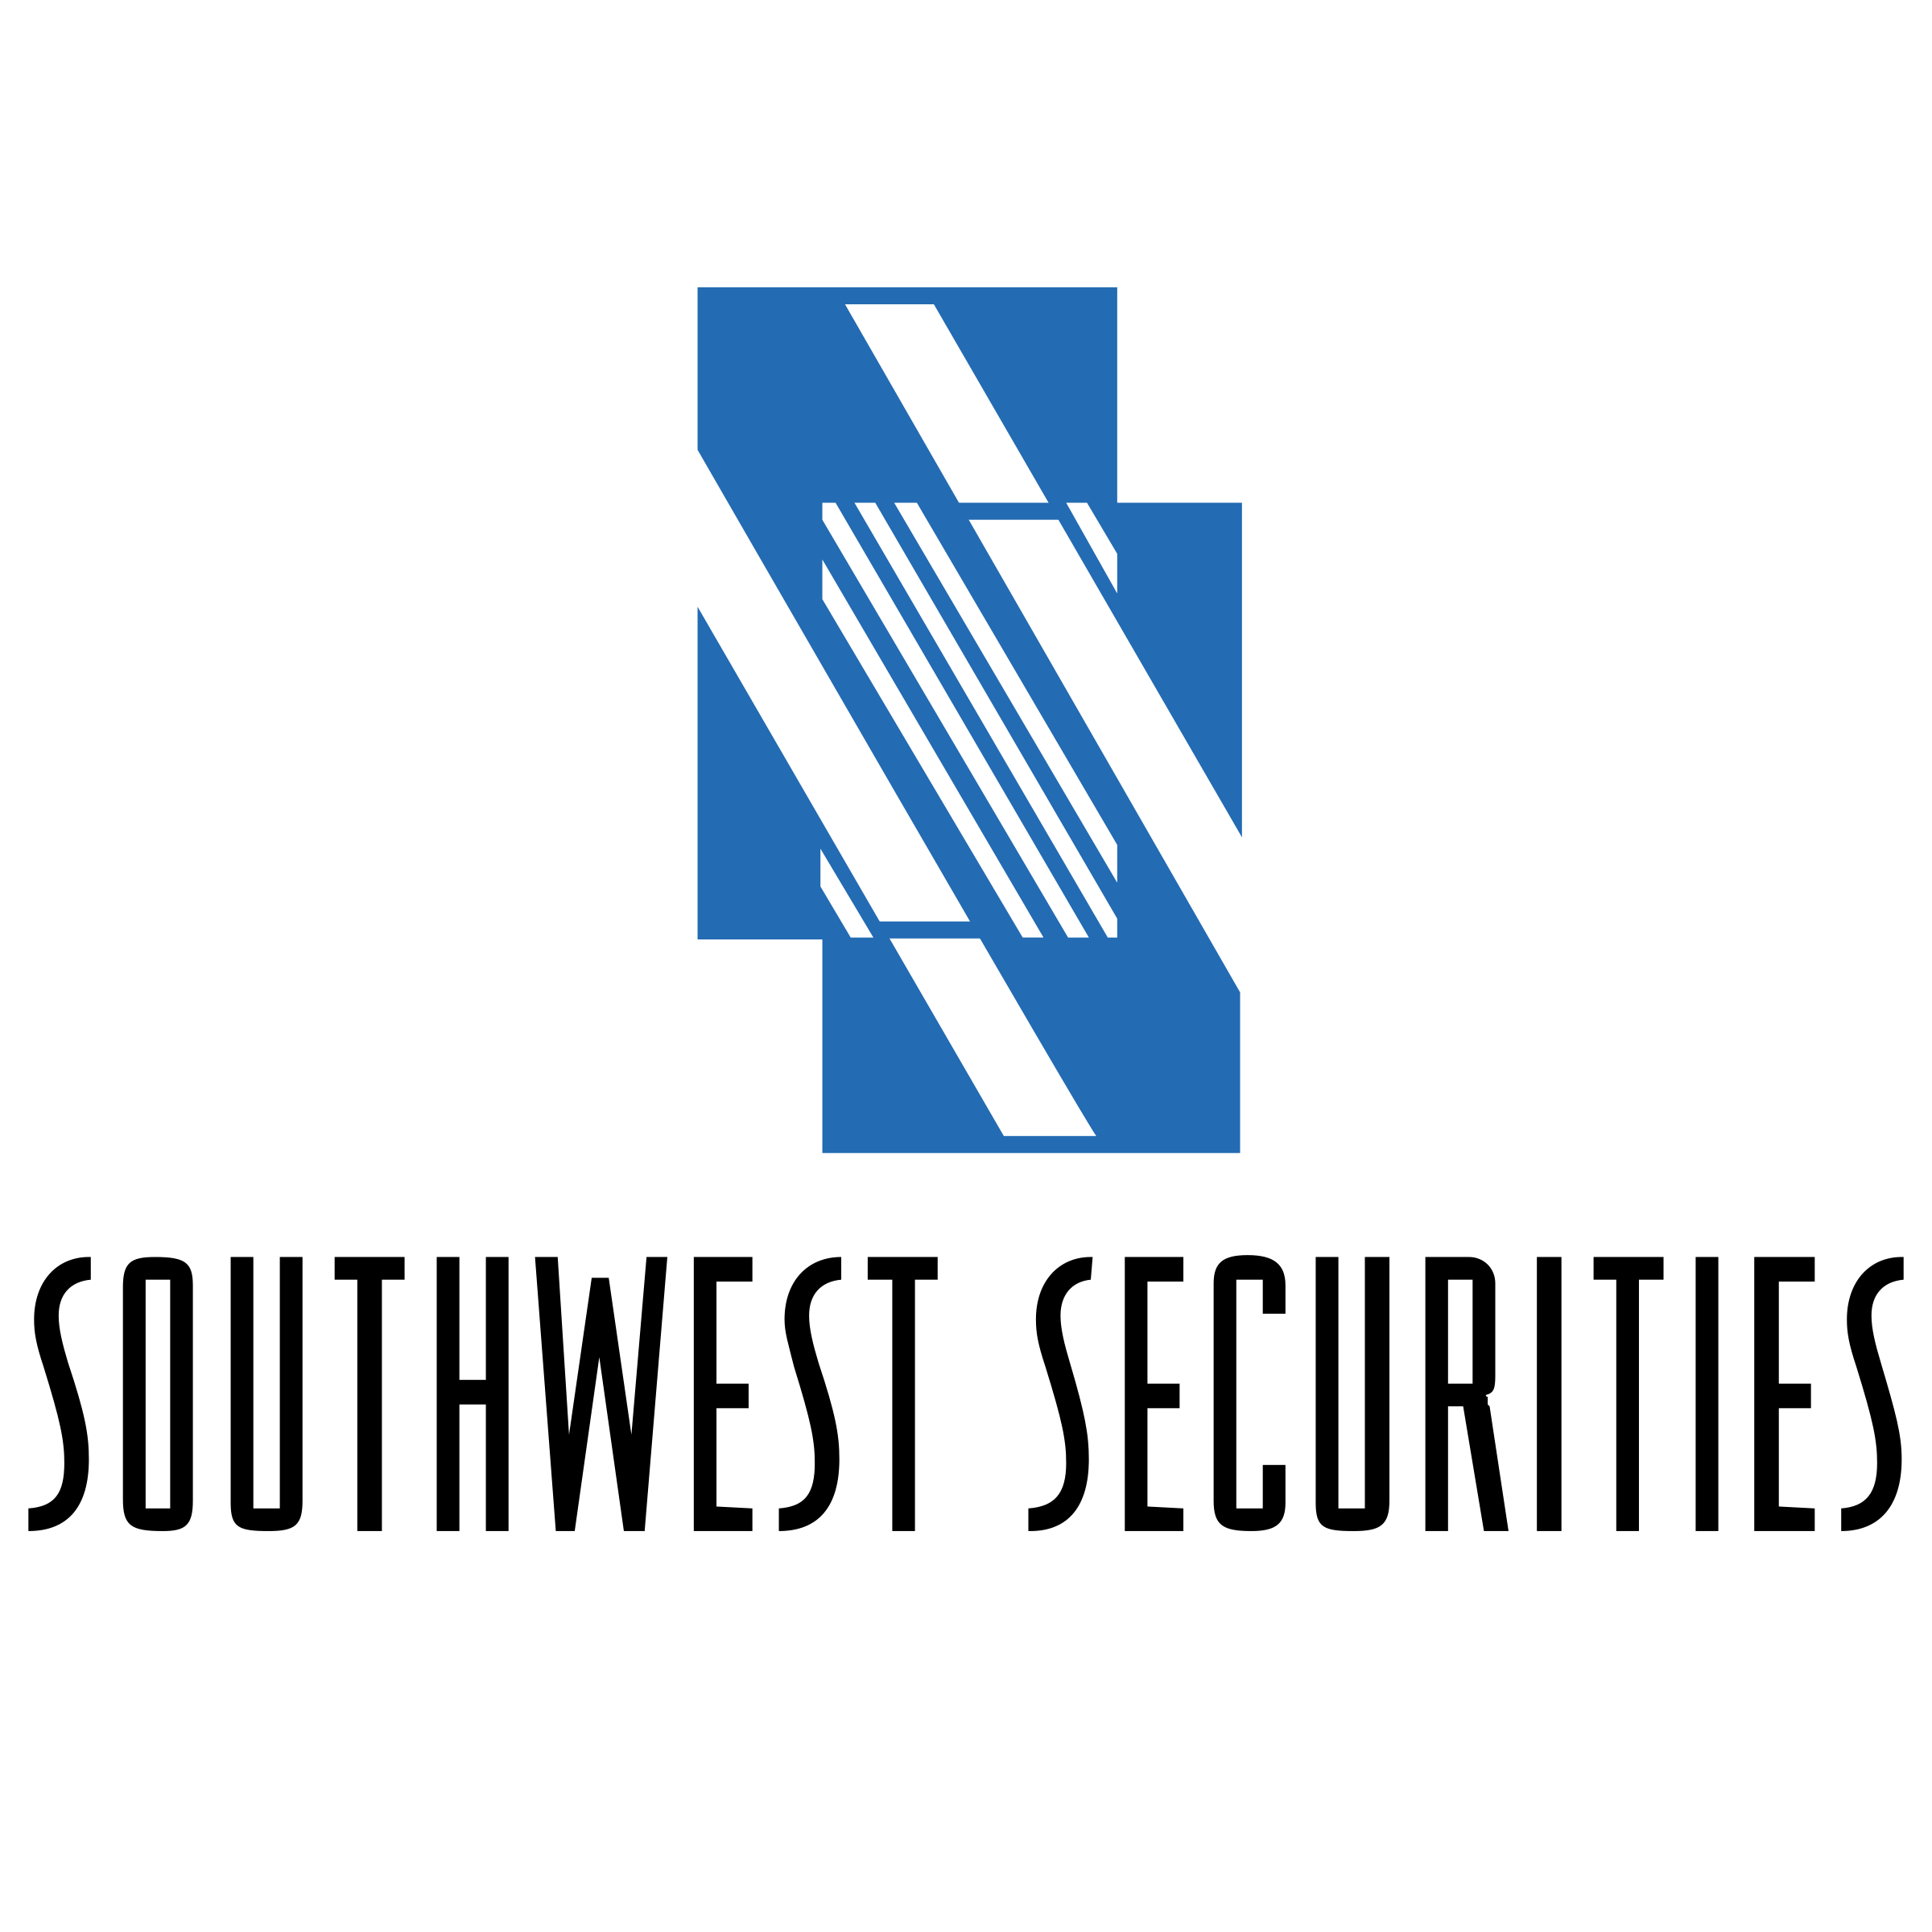 South West Securities Logo - Southwest Securities Logo PNG Transparent & SVG Vector - Freebie Supply